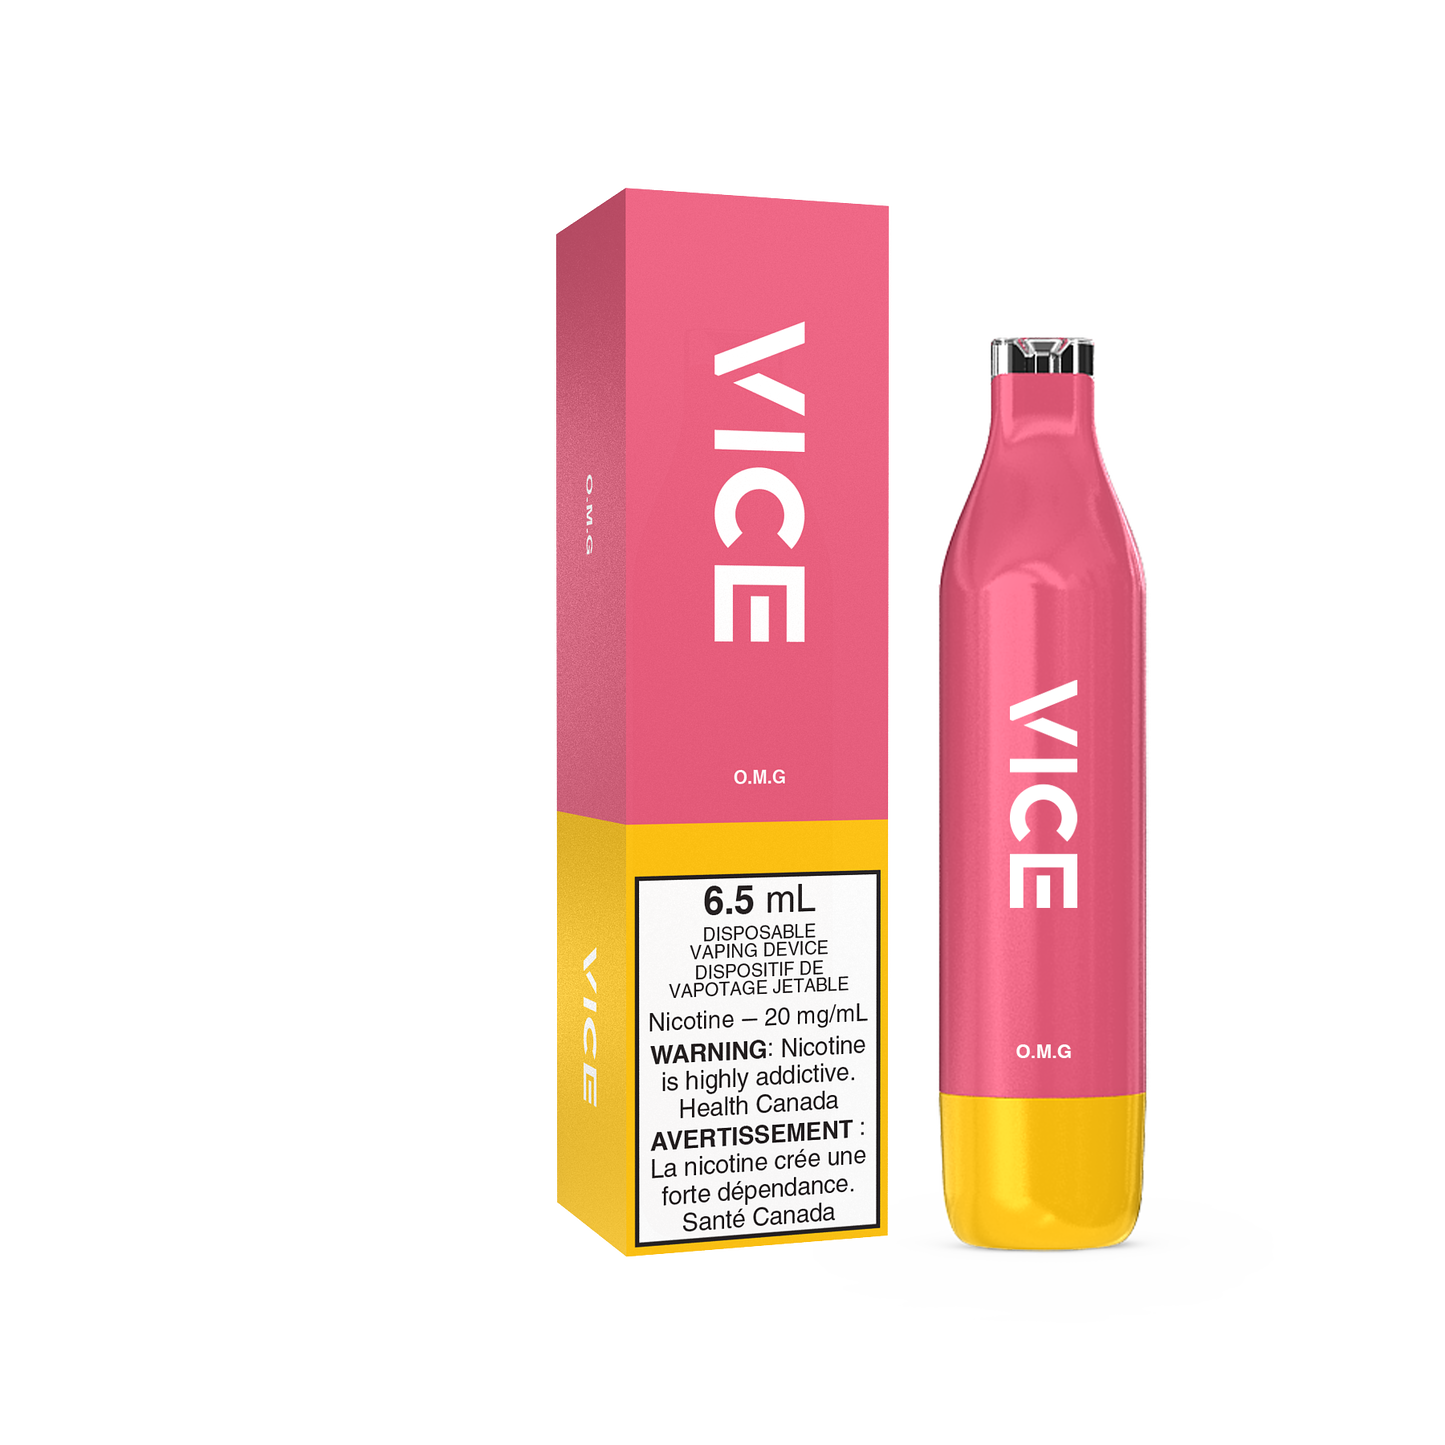 Vice 2500 Puffs Disposable